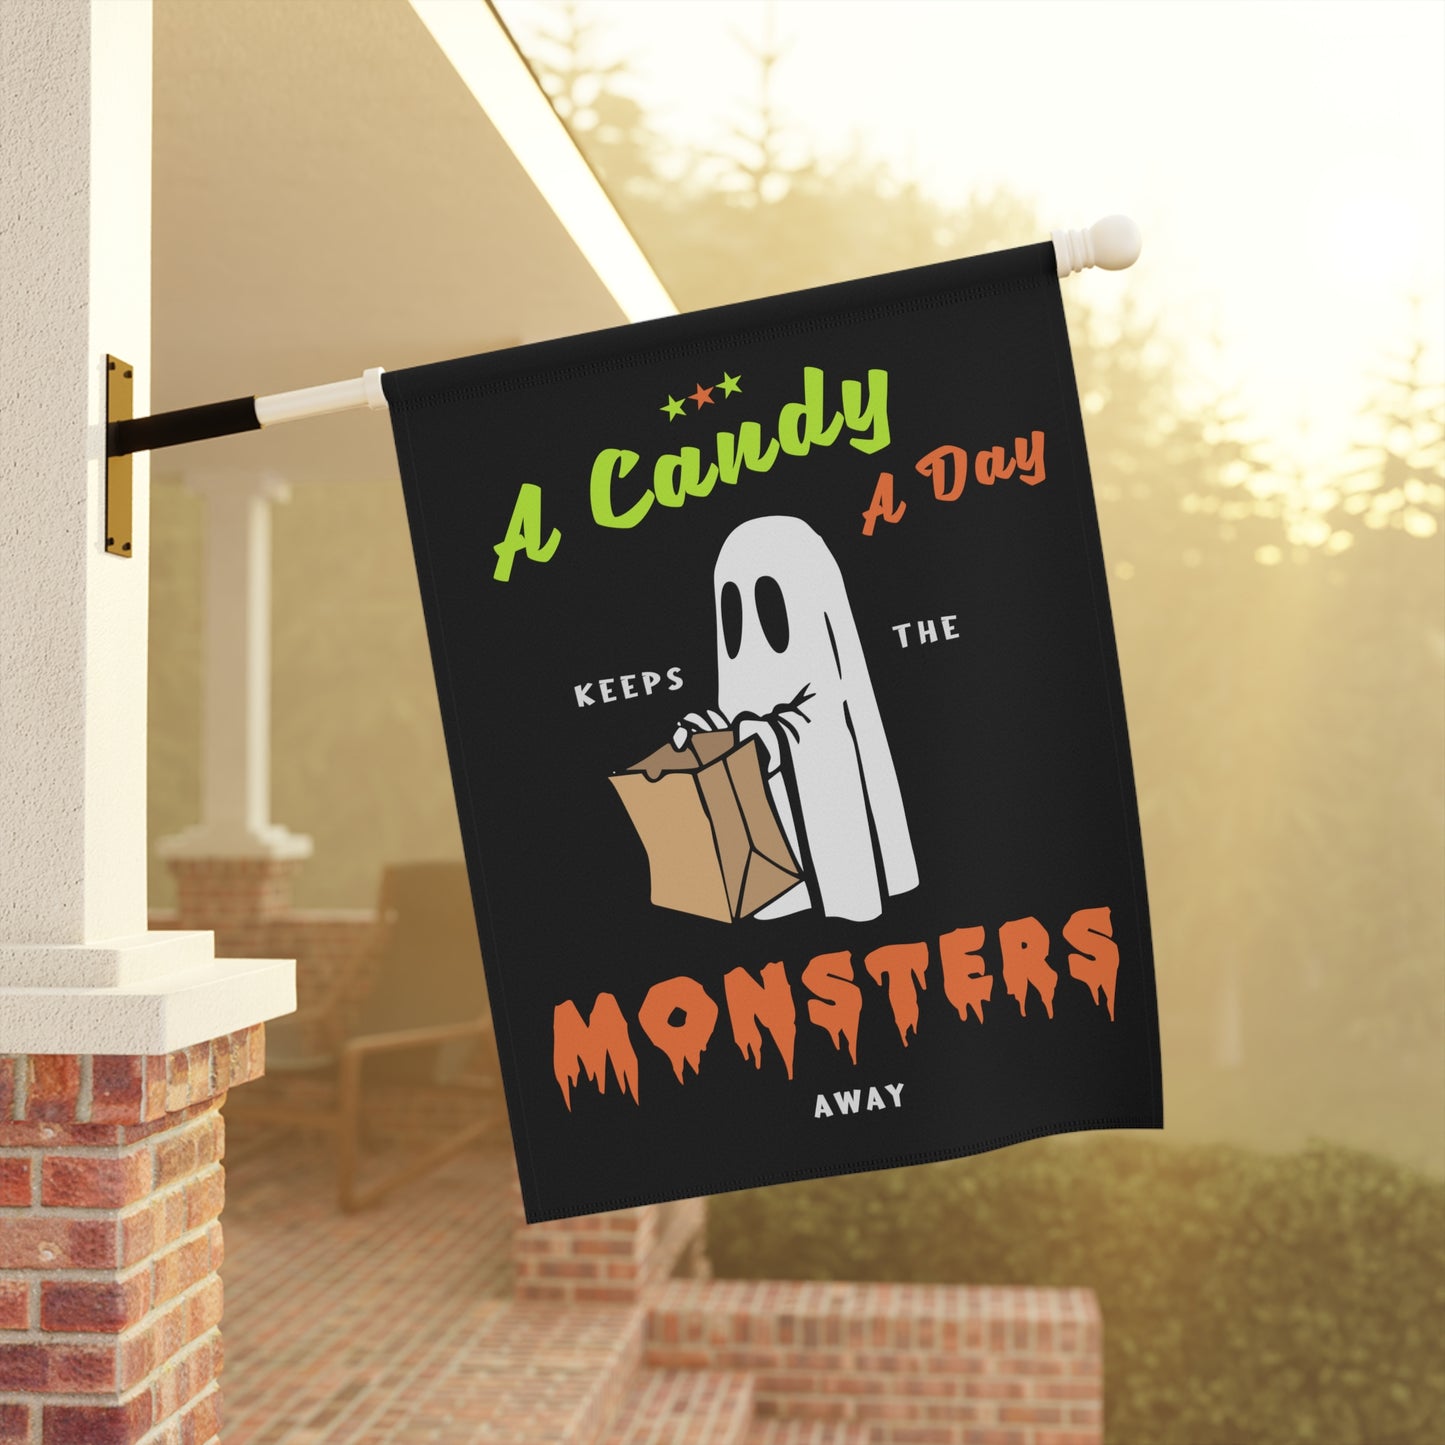 A Candy A Day Keeps the Monsters Away Halloween Garden & House Banner